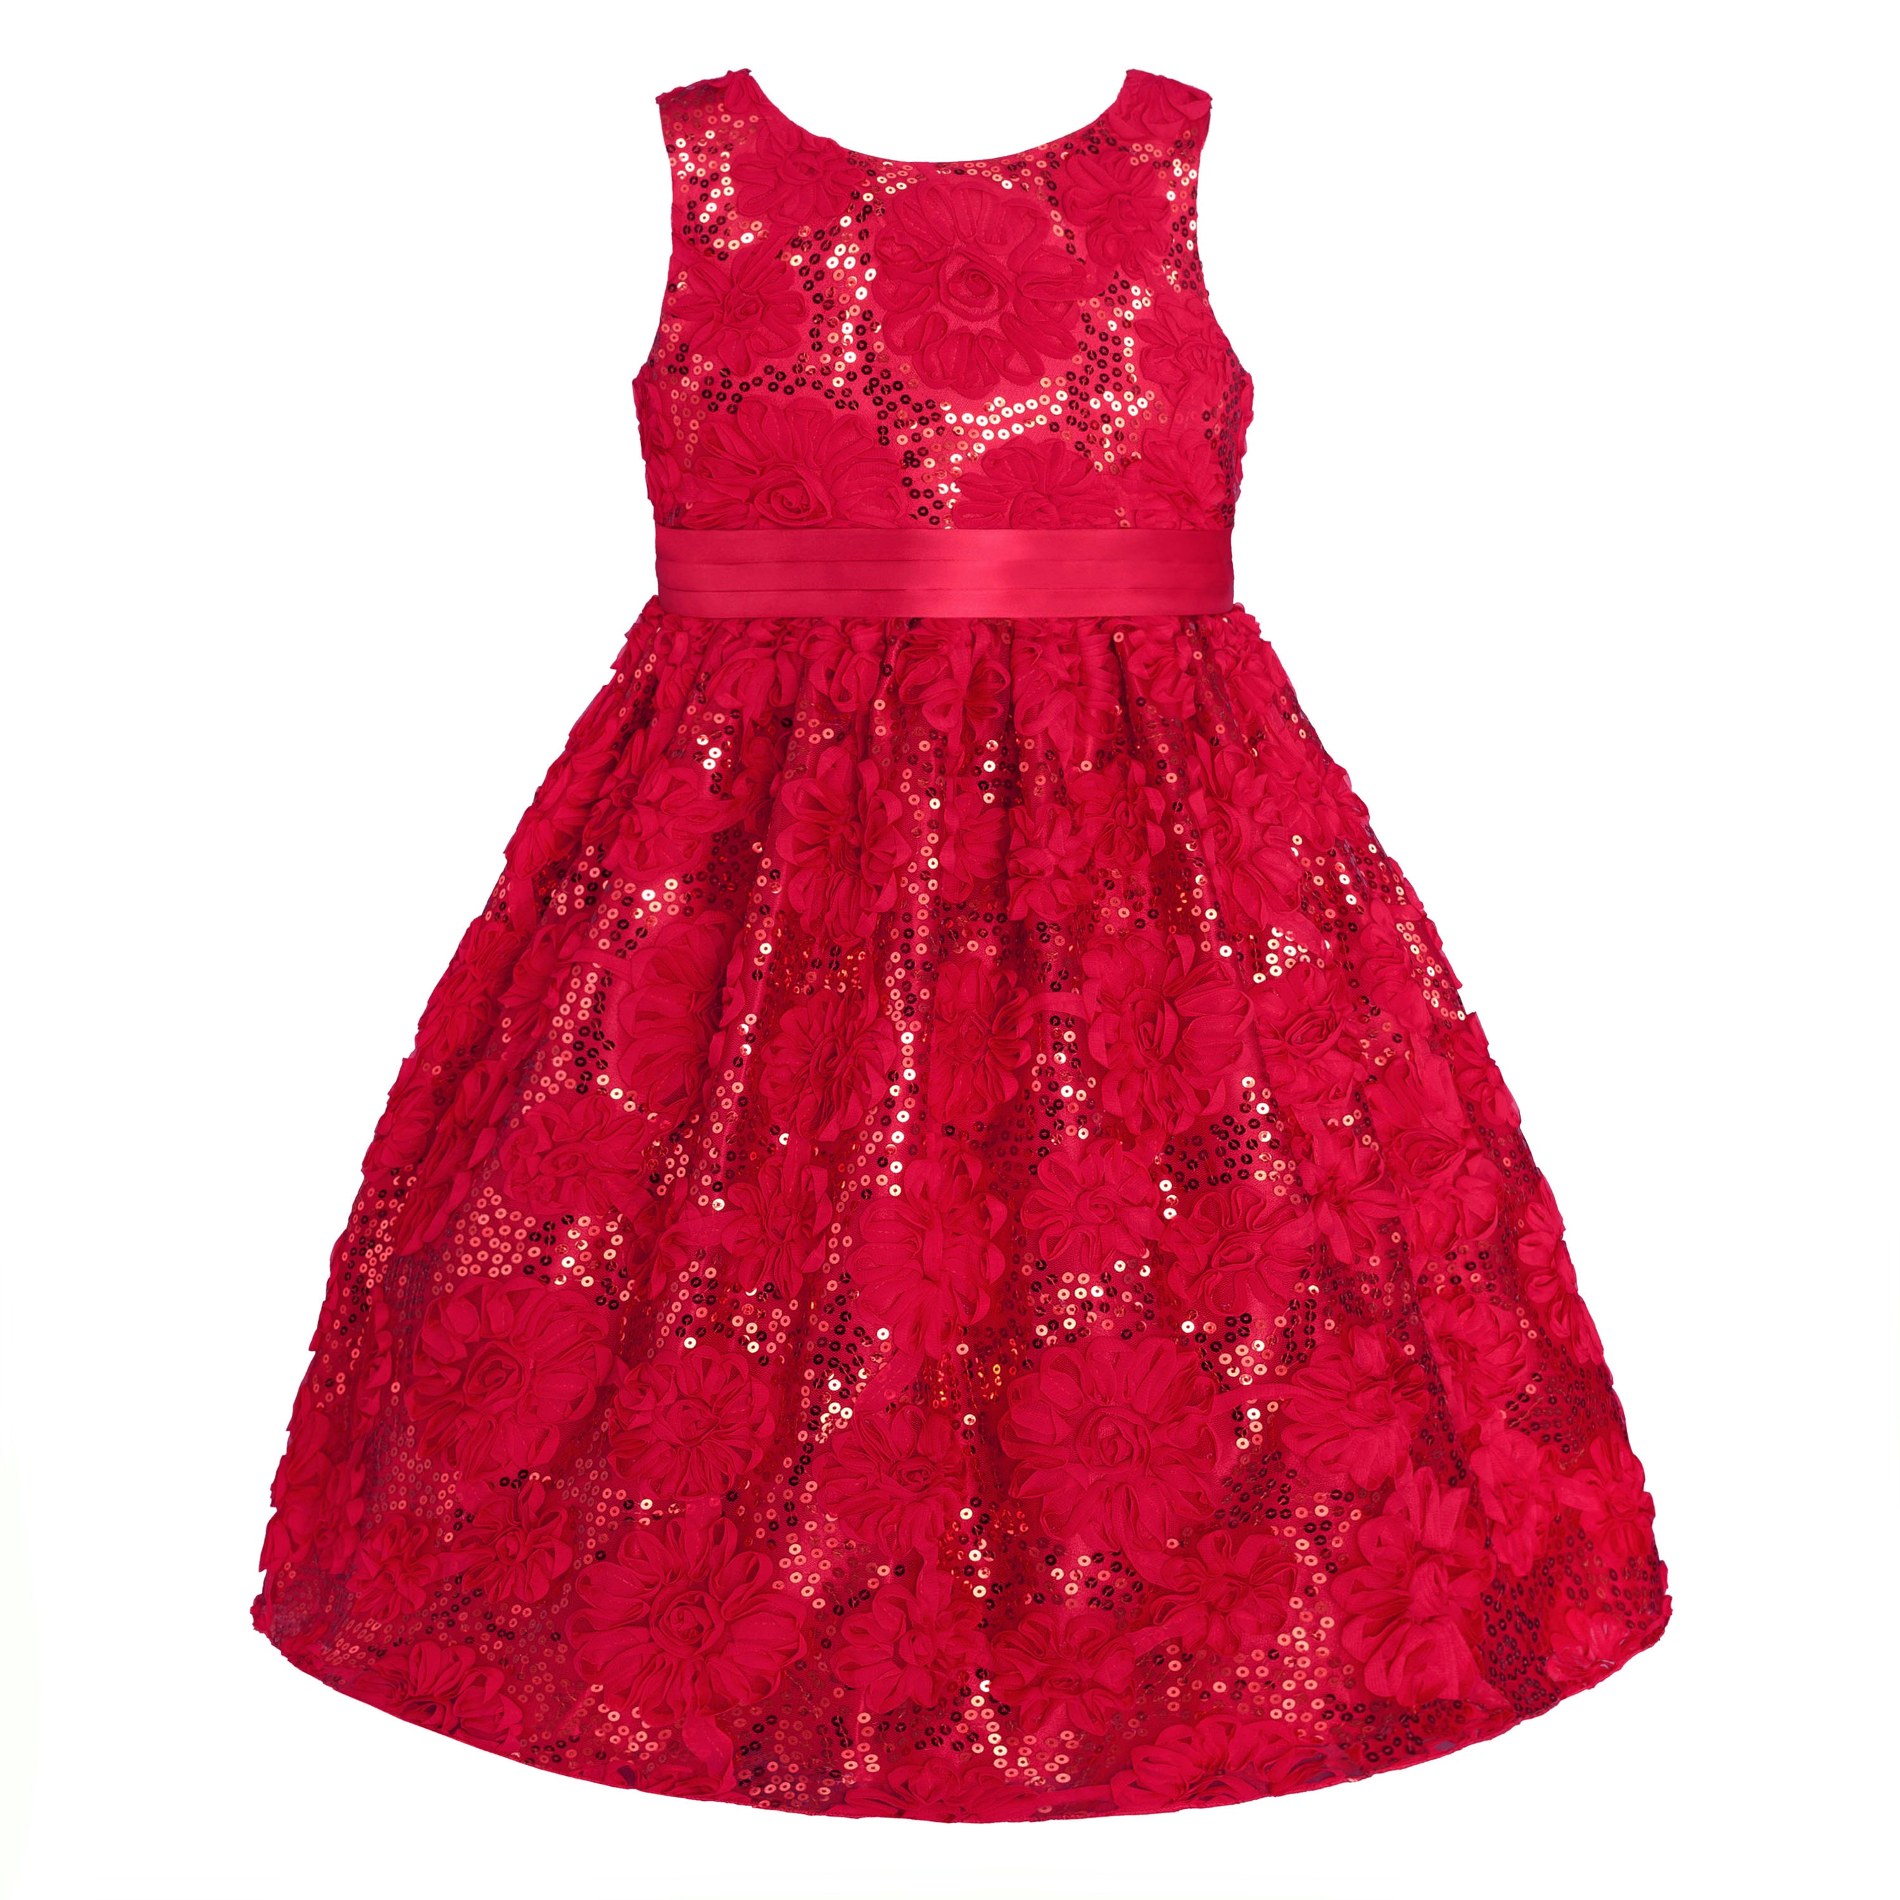 American Princess Girl's Occasion Dress - Floral